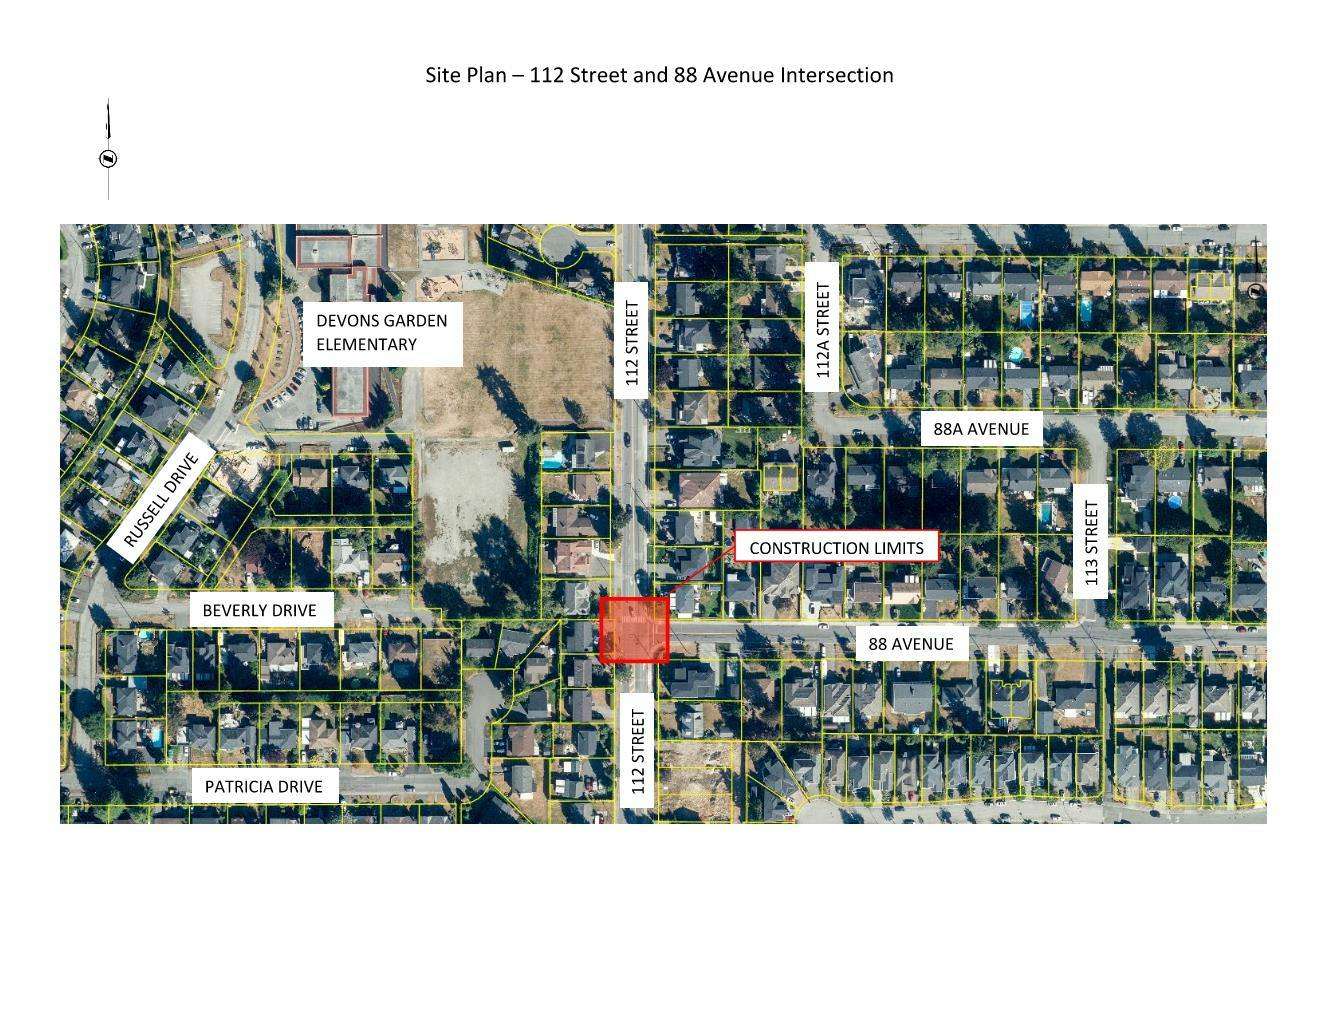 Site Map_112 St and 88 Ave.jpg